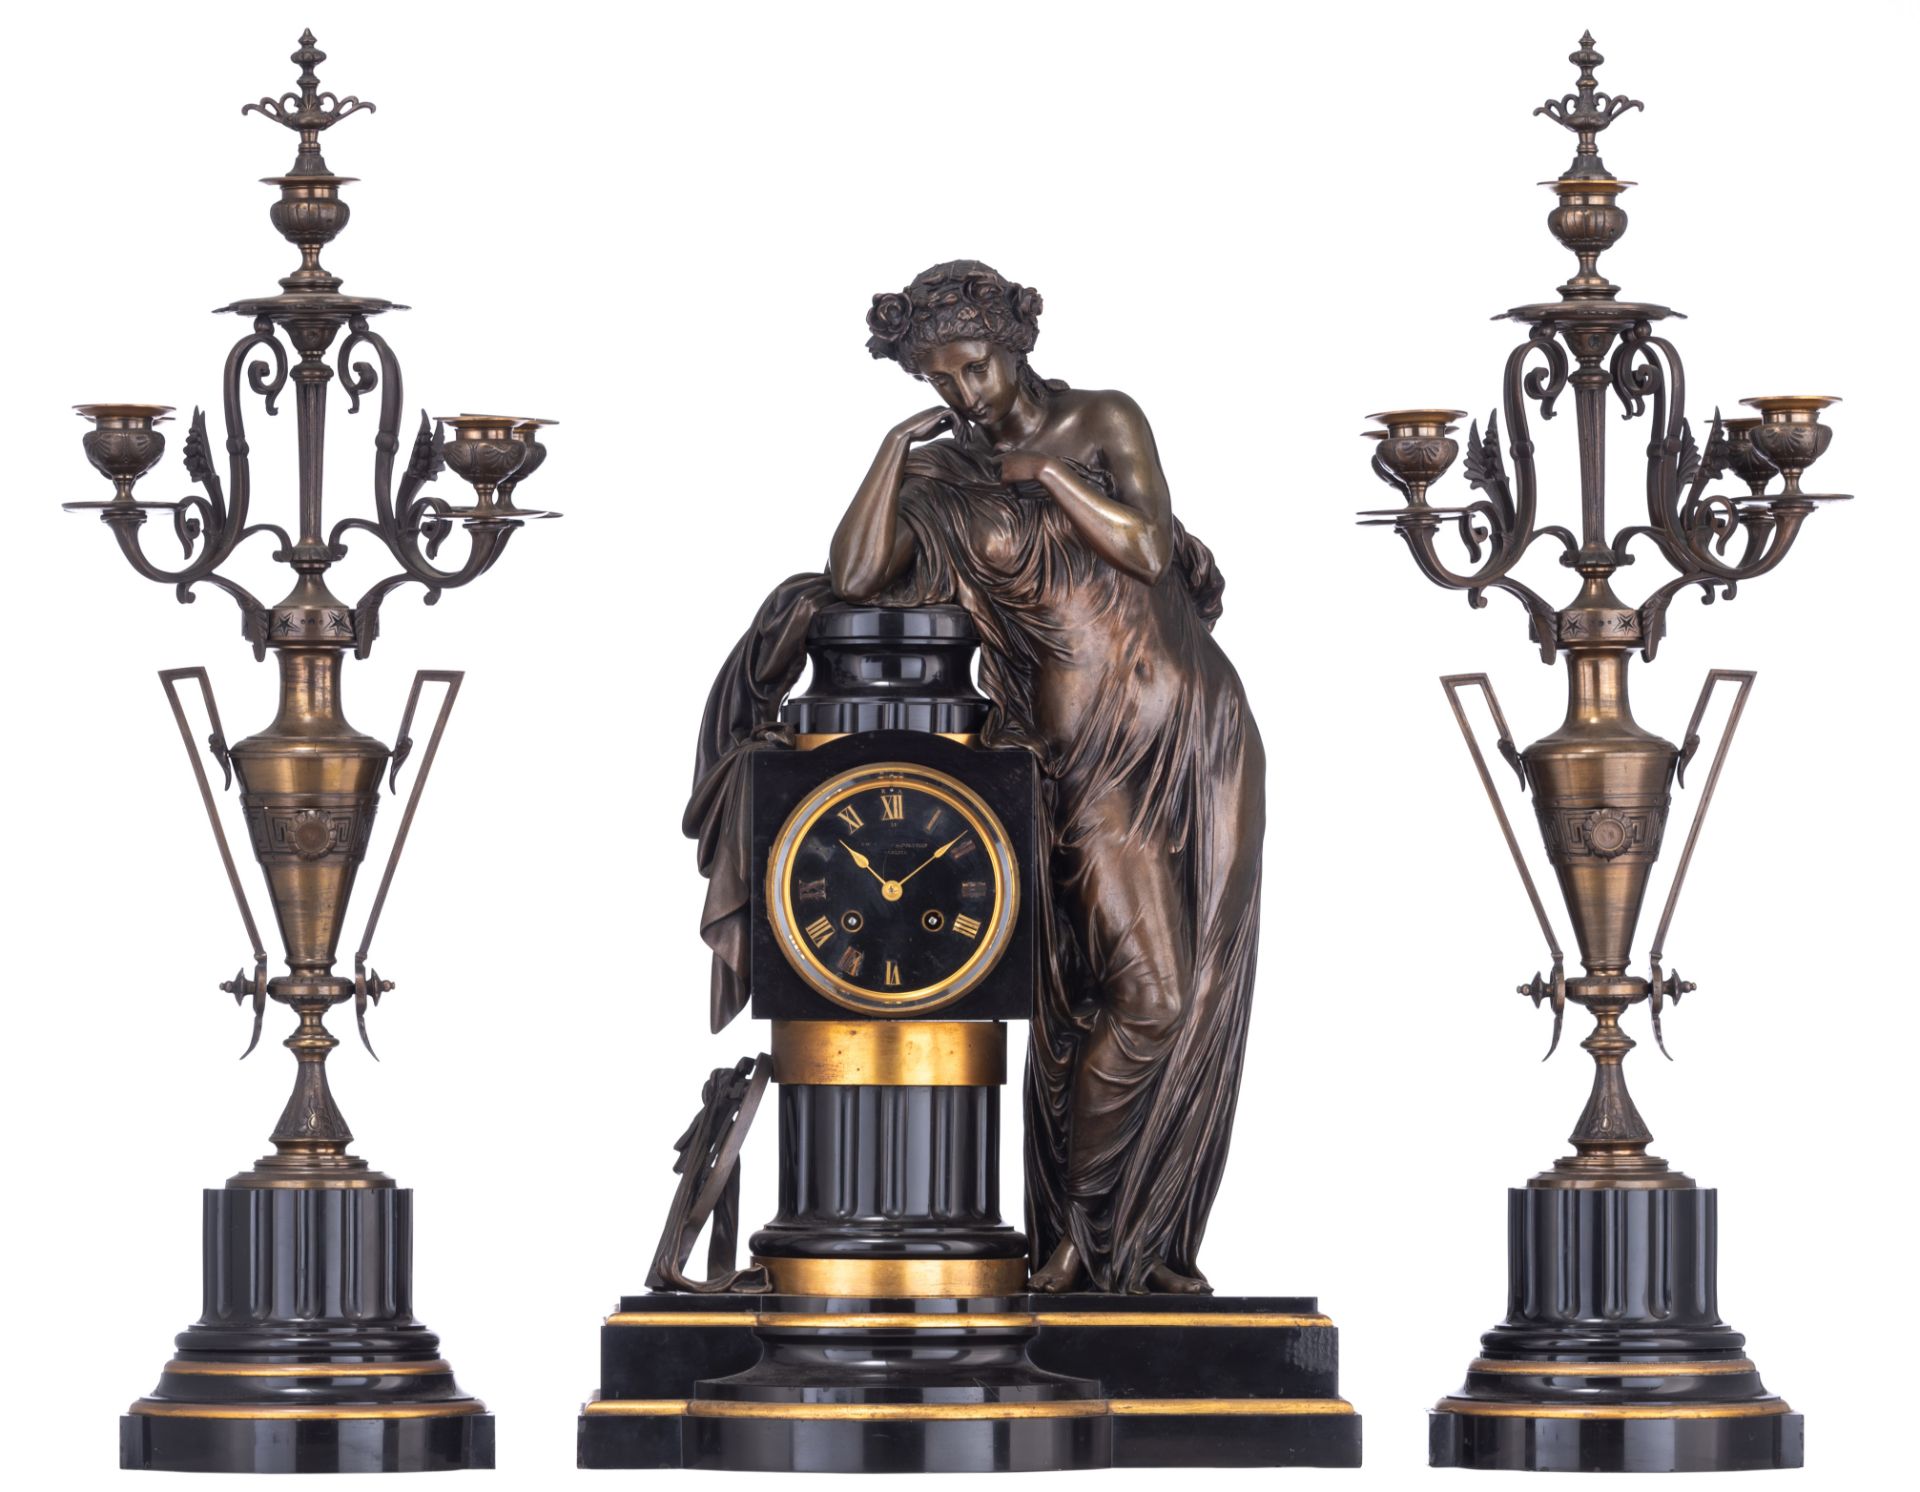 A fine Neoclassical three-piece clock garniture, with a patinated bronze antique beauty on top, H 56